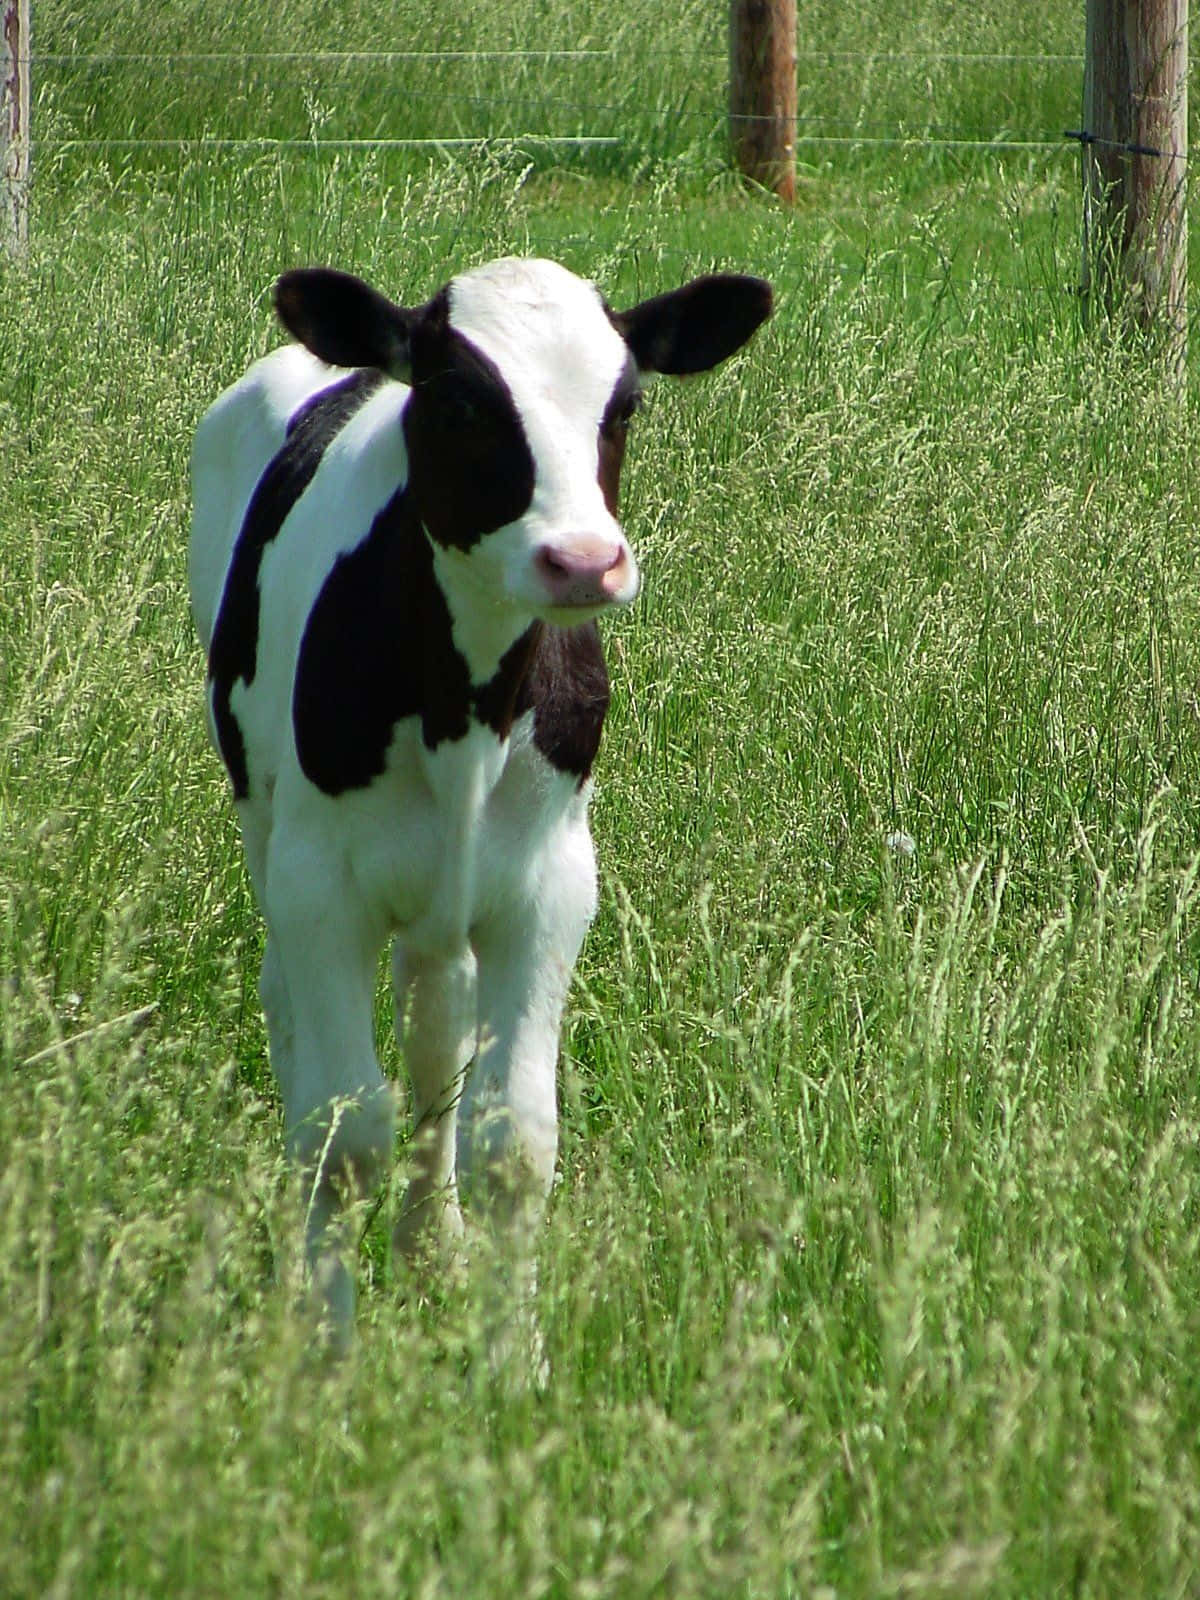 A black and white cow leisurely standing in a green field of grass.